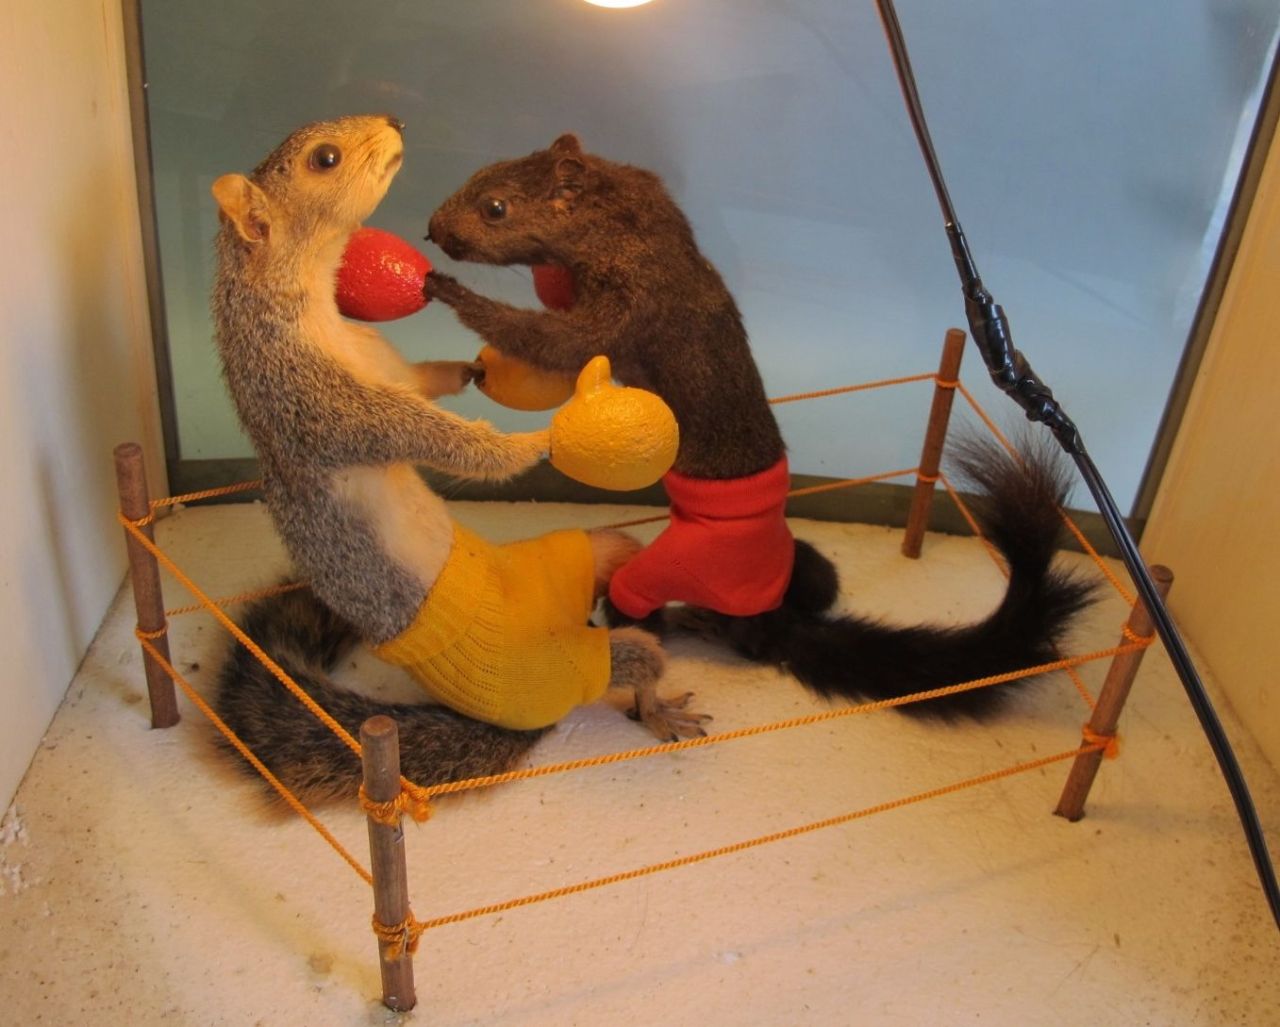 Daisy and I are nerding out over this vintage squirrel diorama that was listed on eBay. So dope.